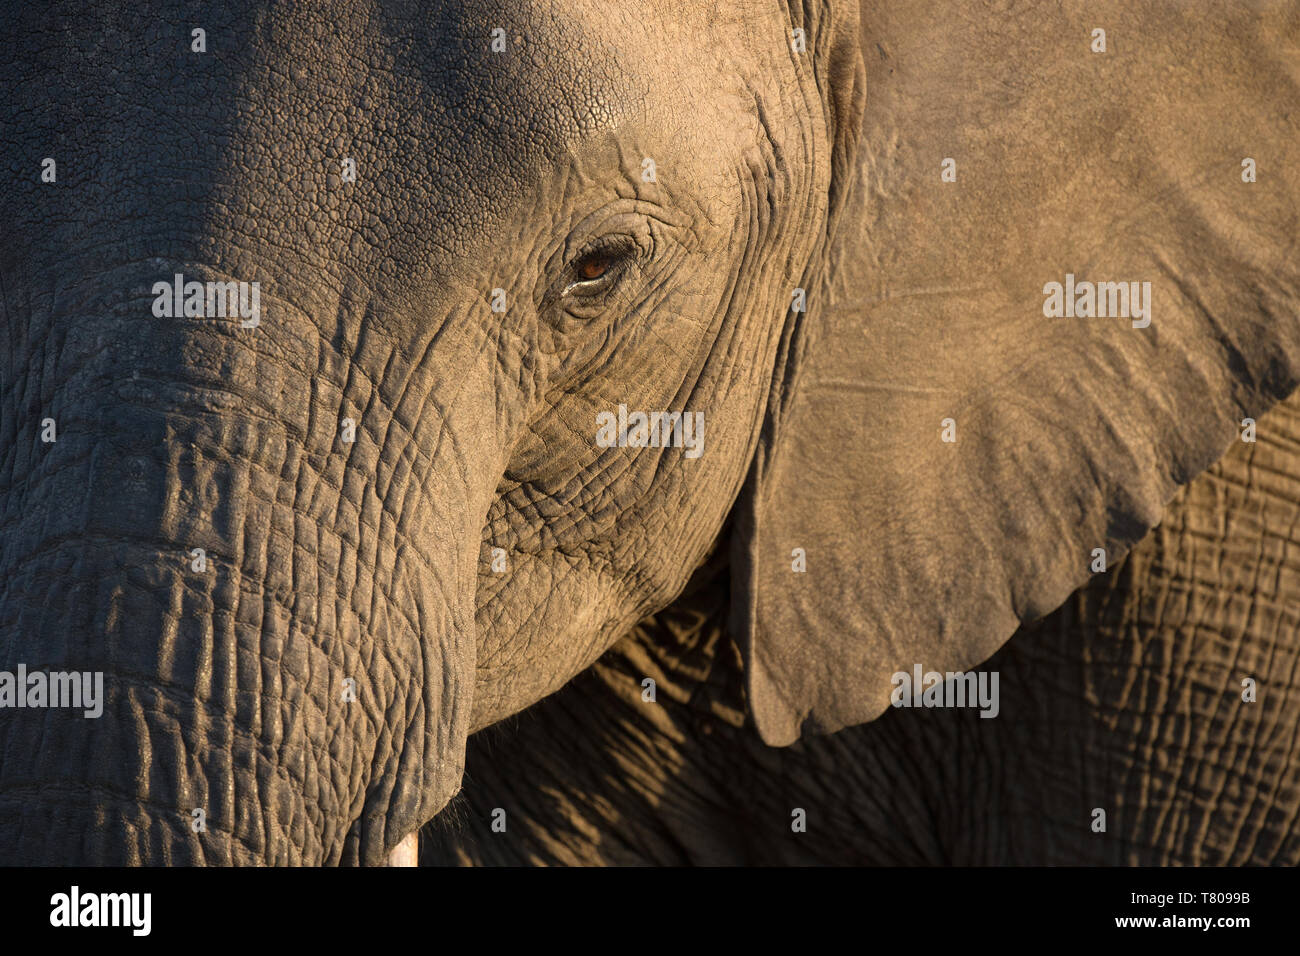 Close-up di baby Elefante africano (Loxodonta africana), il Parco Nazionale Kruger, Sud-Africa, Africa Foto Stock